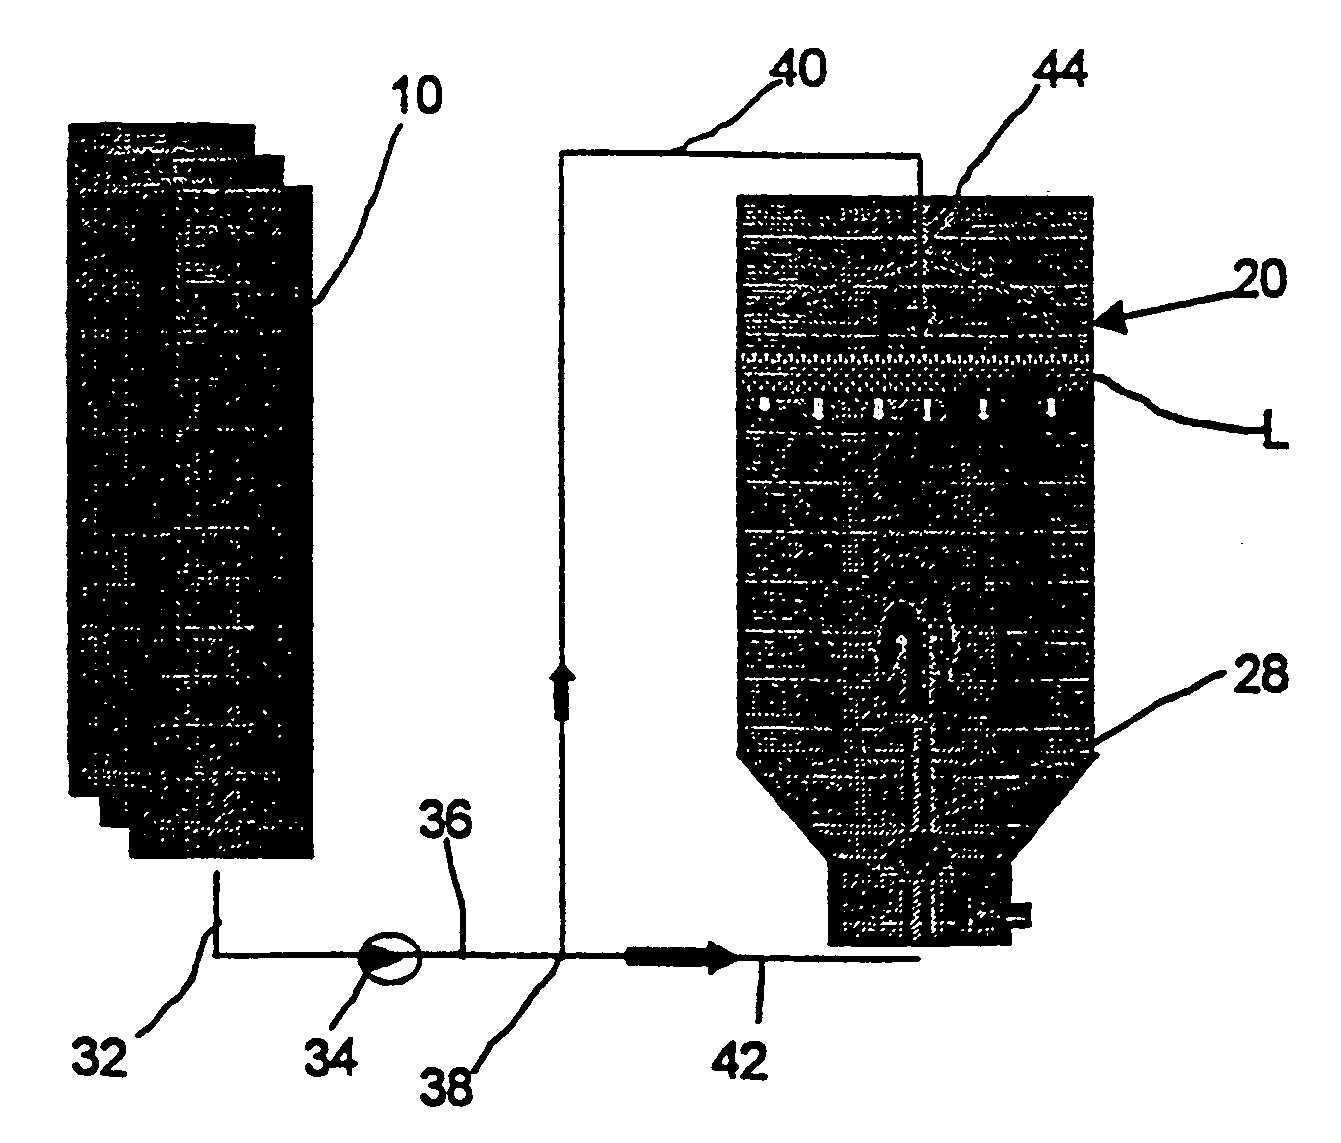 Process for feeding pulp into a blow tank or storage tank